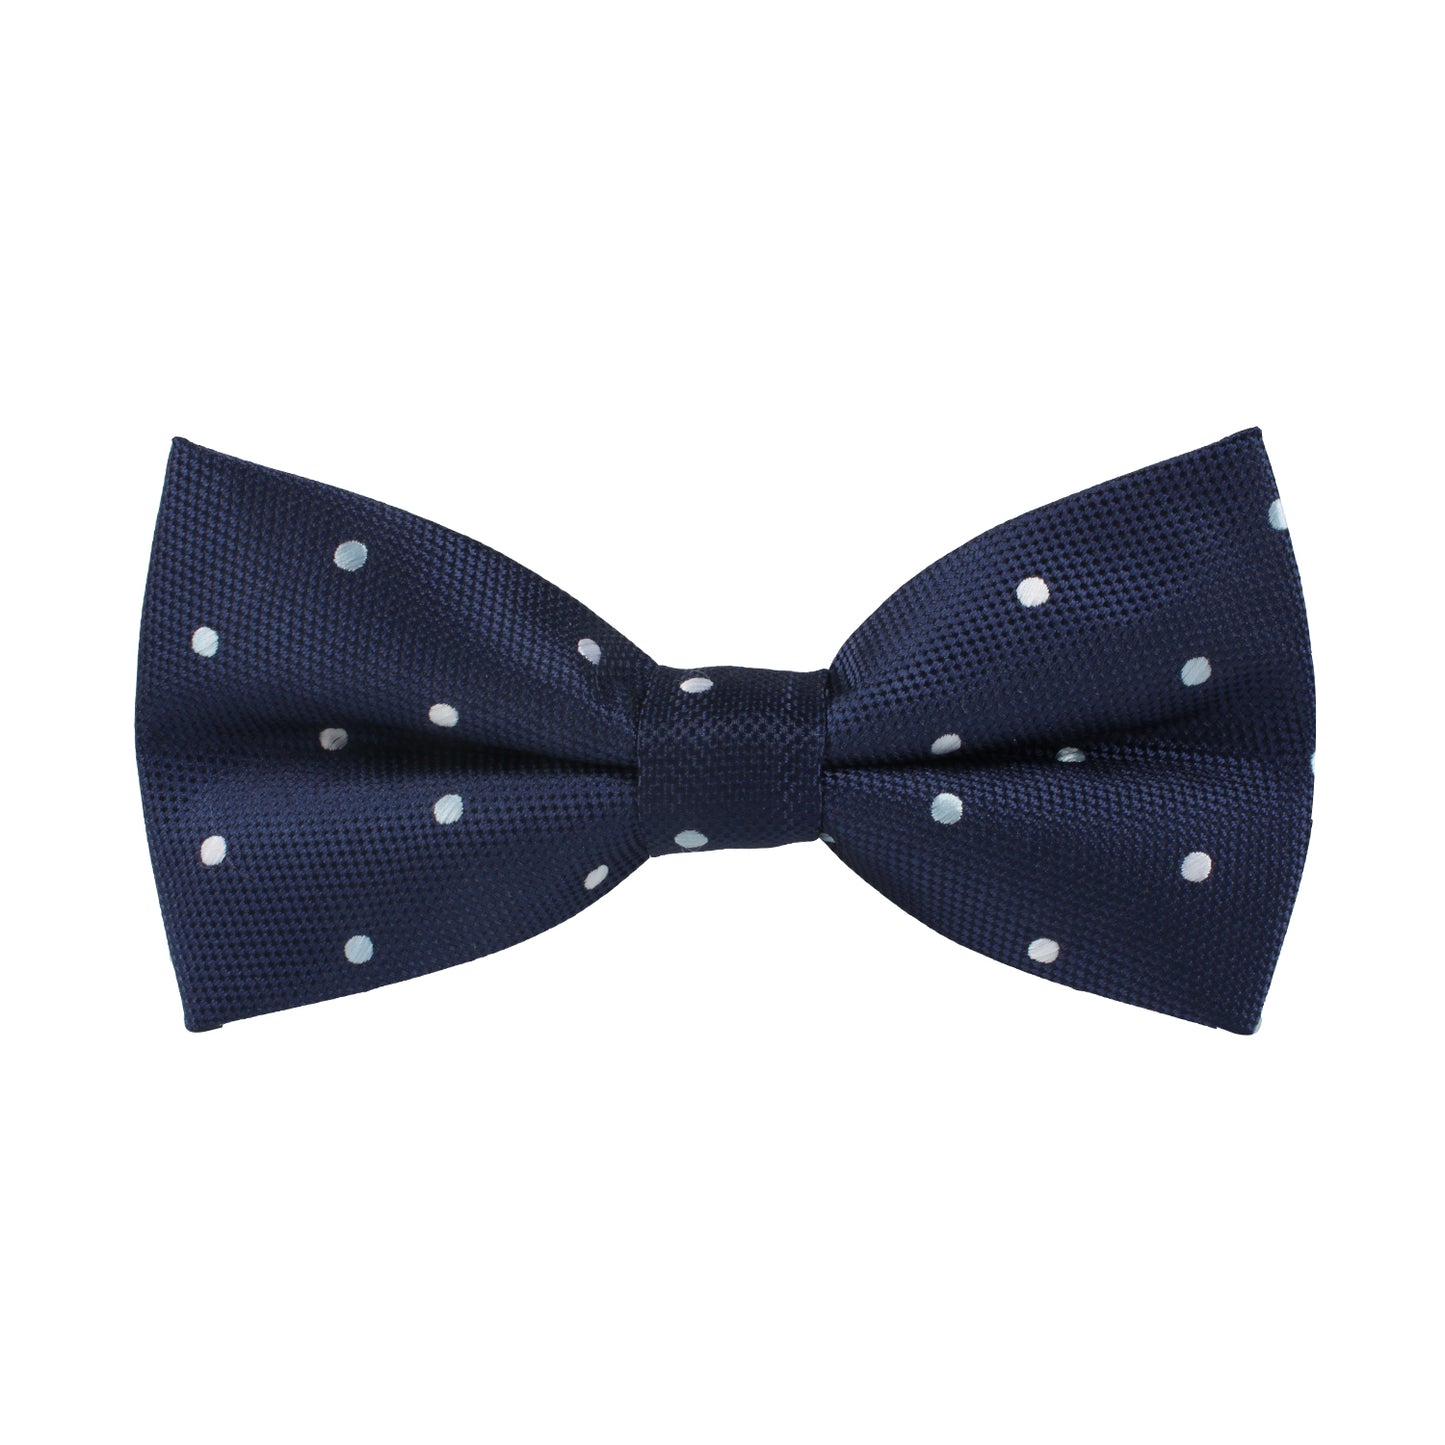 White and Blue Polka Dot Bow Tie